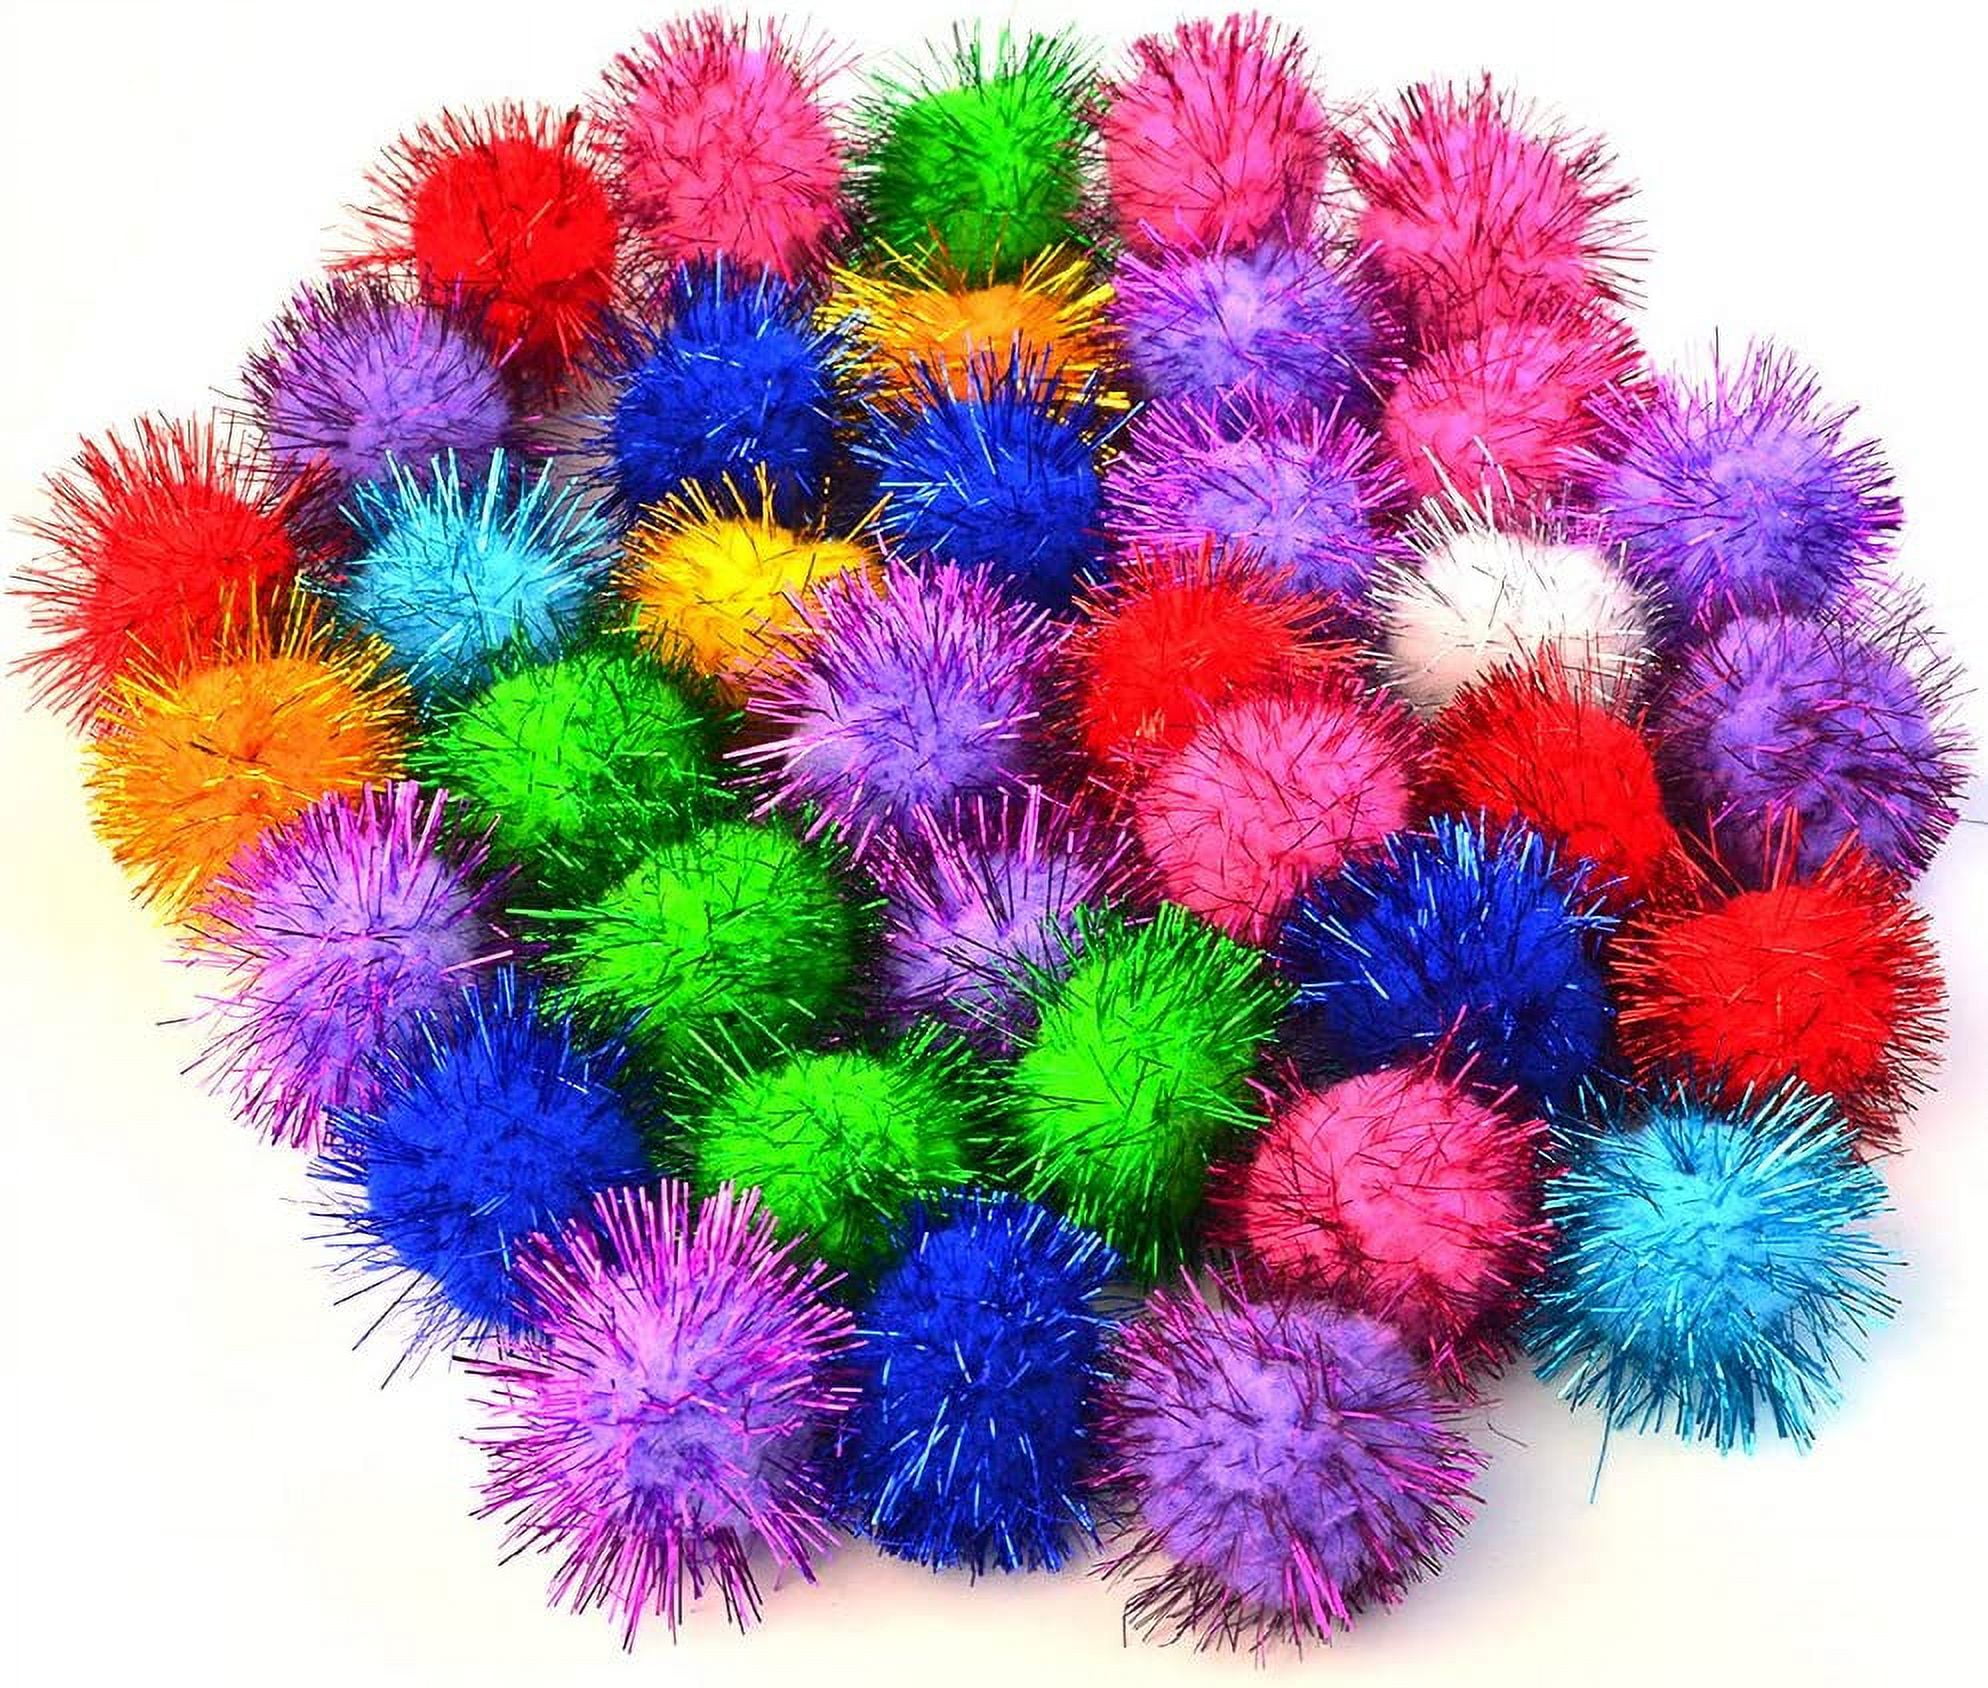 Pom Poms Glitter Variety Multi-Colored .50 to 1 Inch Value Pack of 100, Mardel